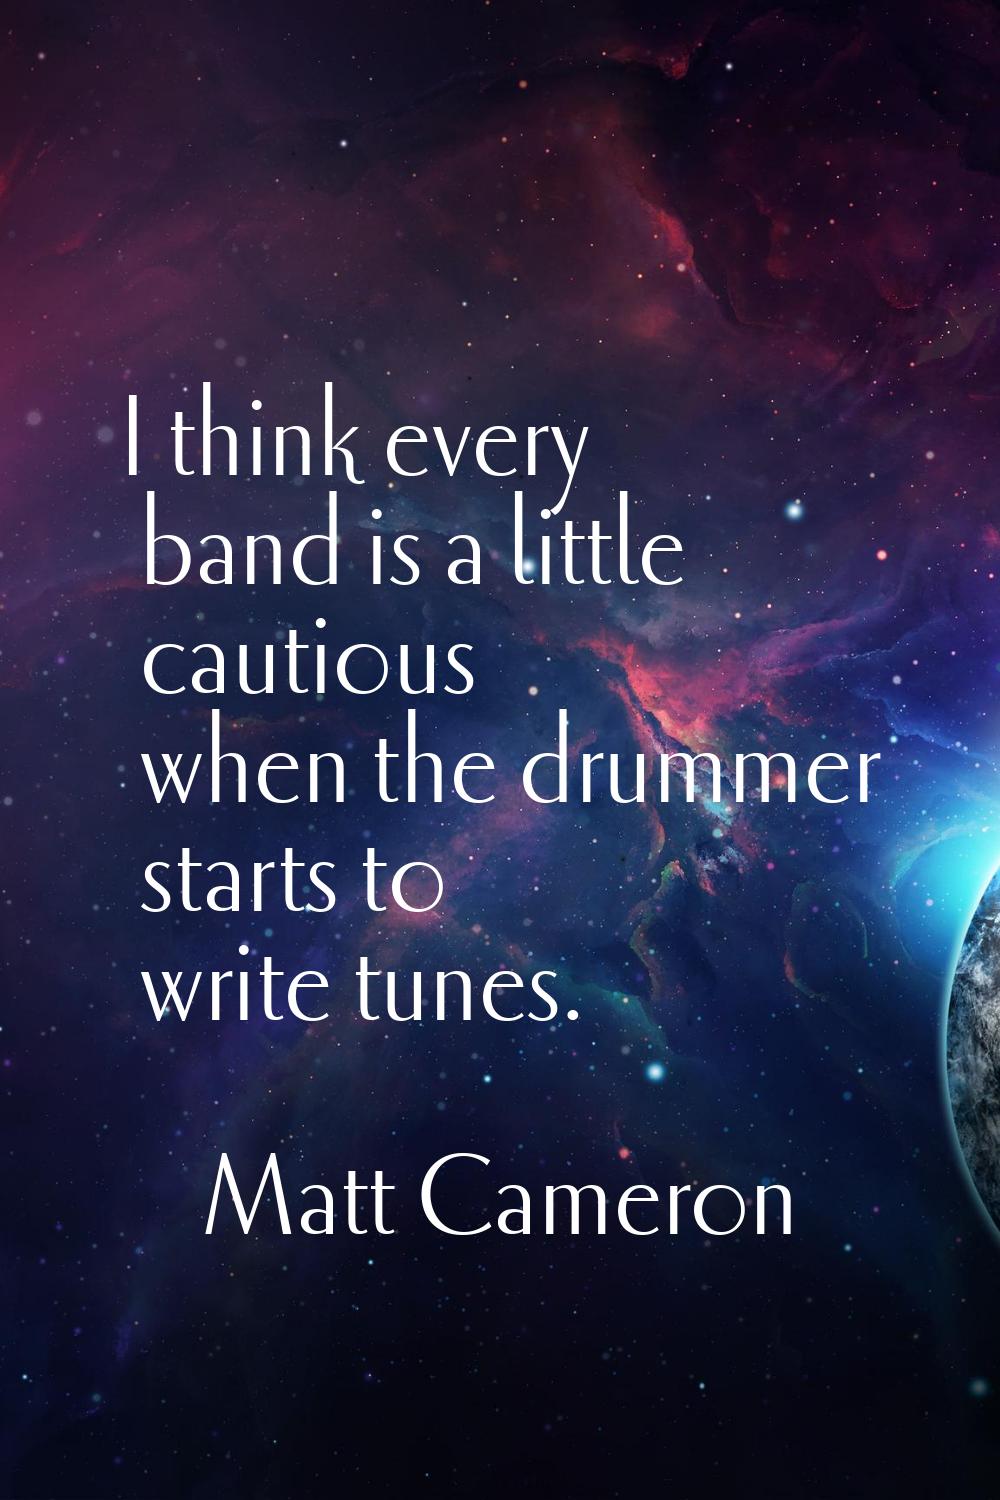 I think every band is a little cautious when the drummer starts to write tunes.